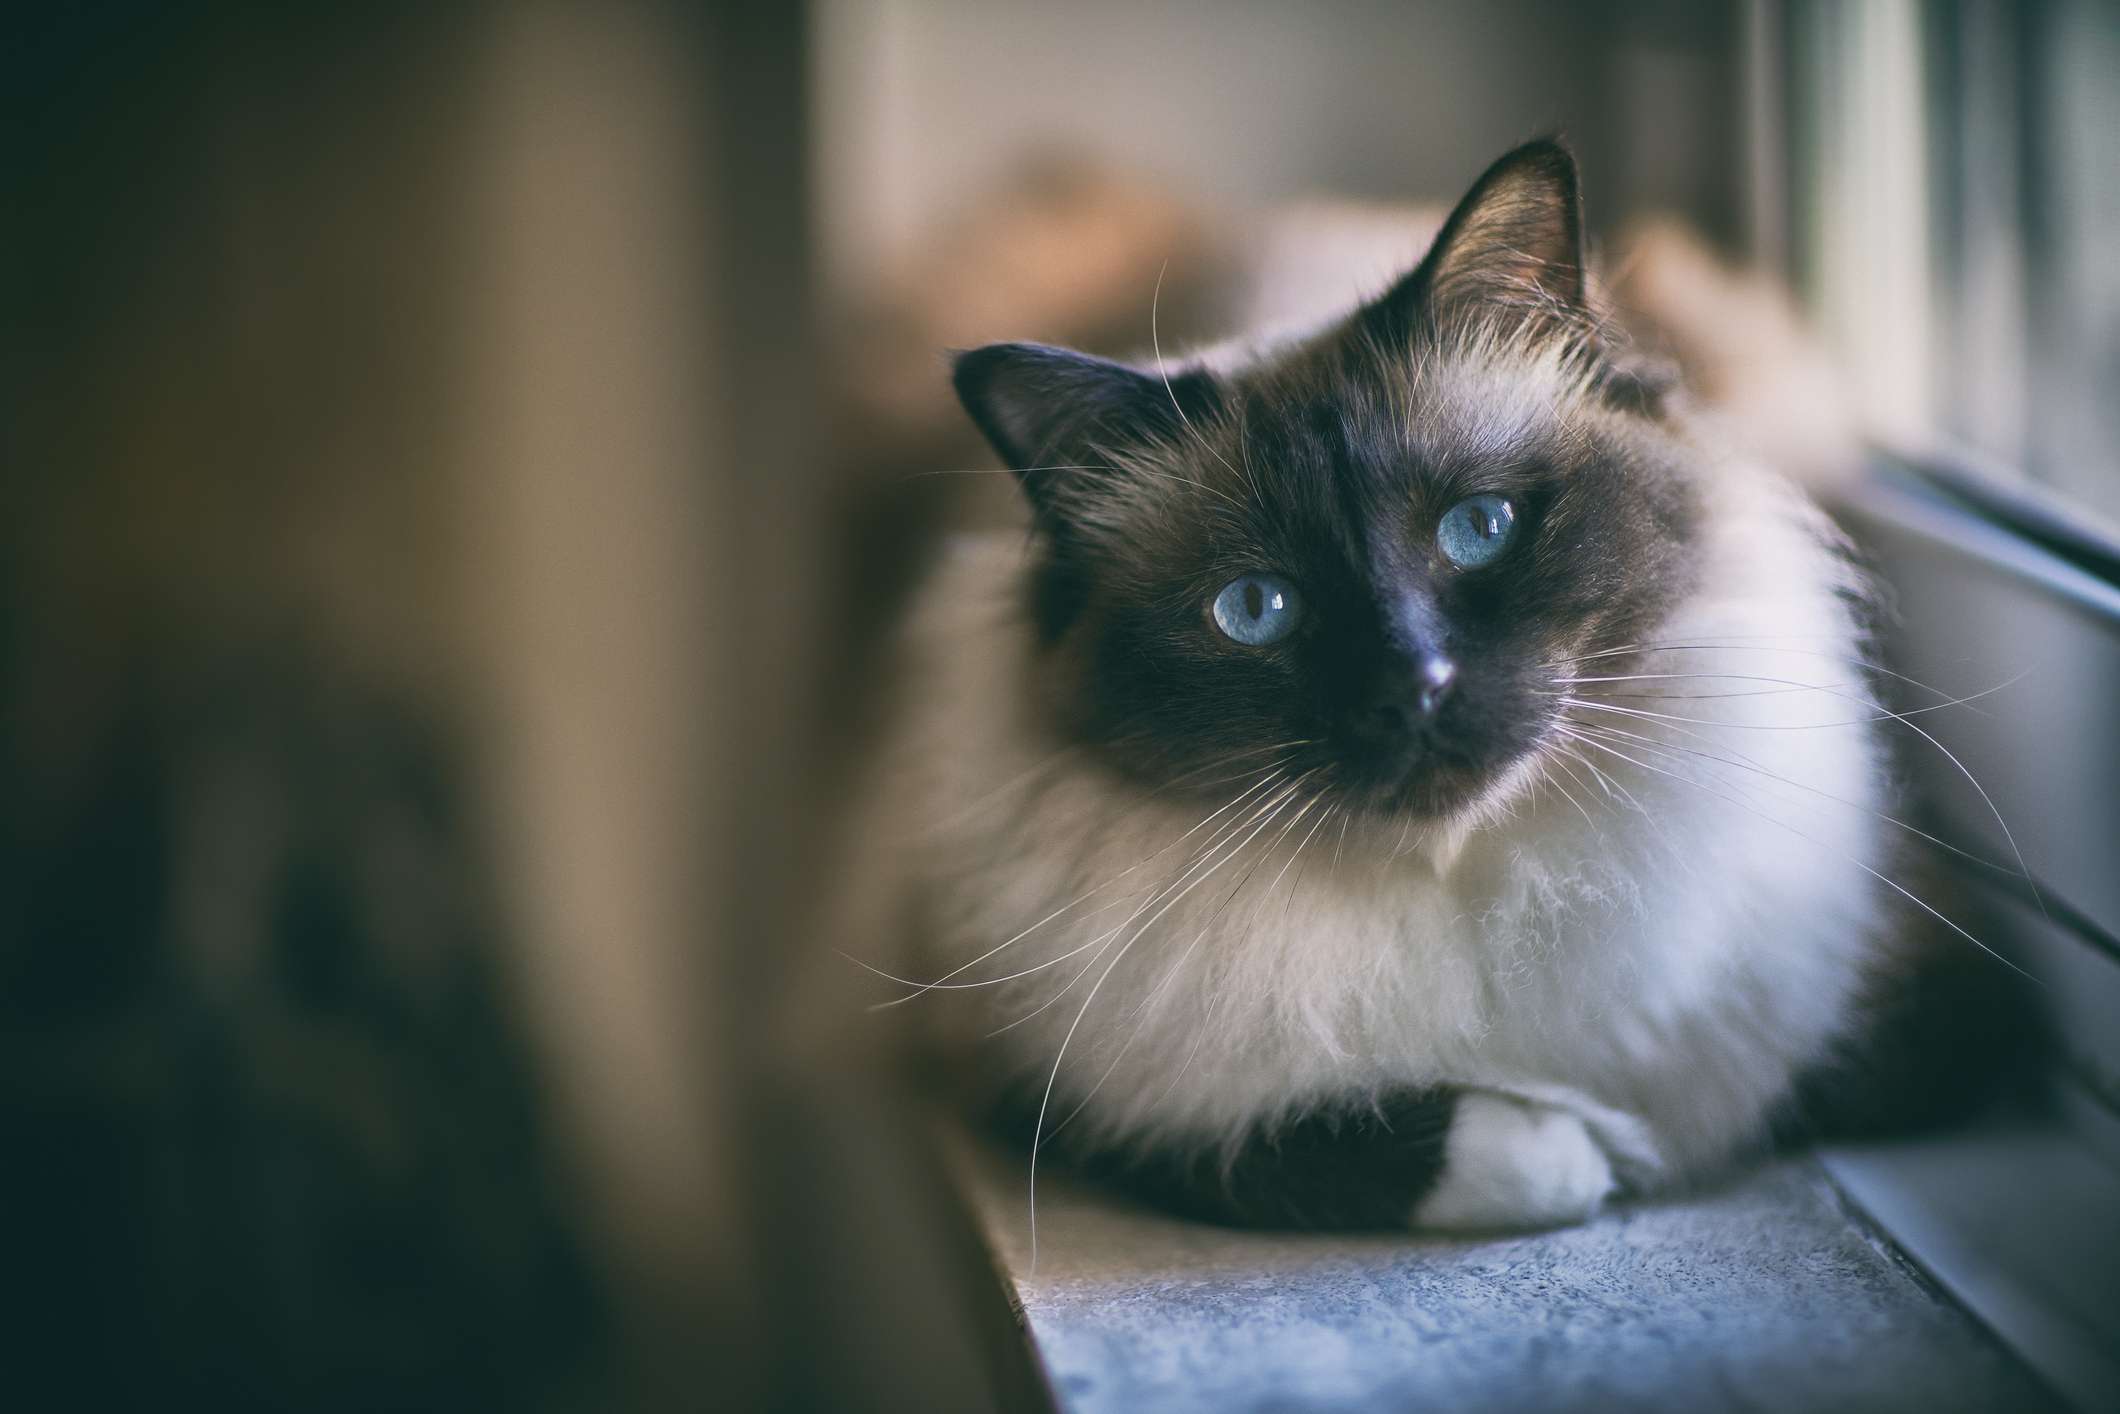 A long-haired cat with a black face and blue eyes sitting on a windowsill.